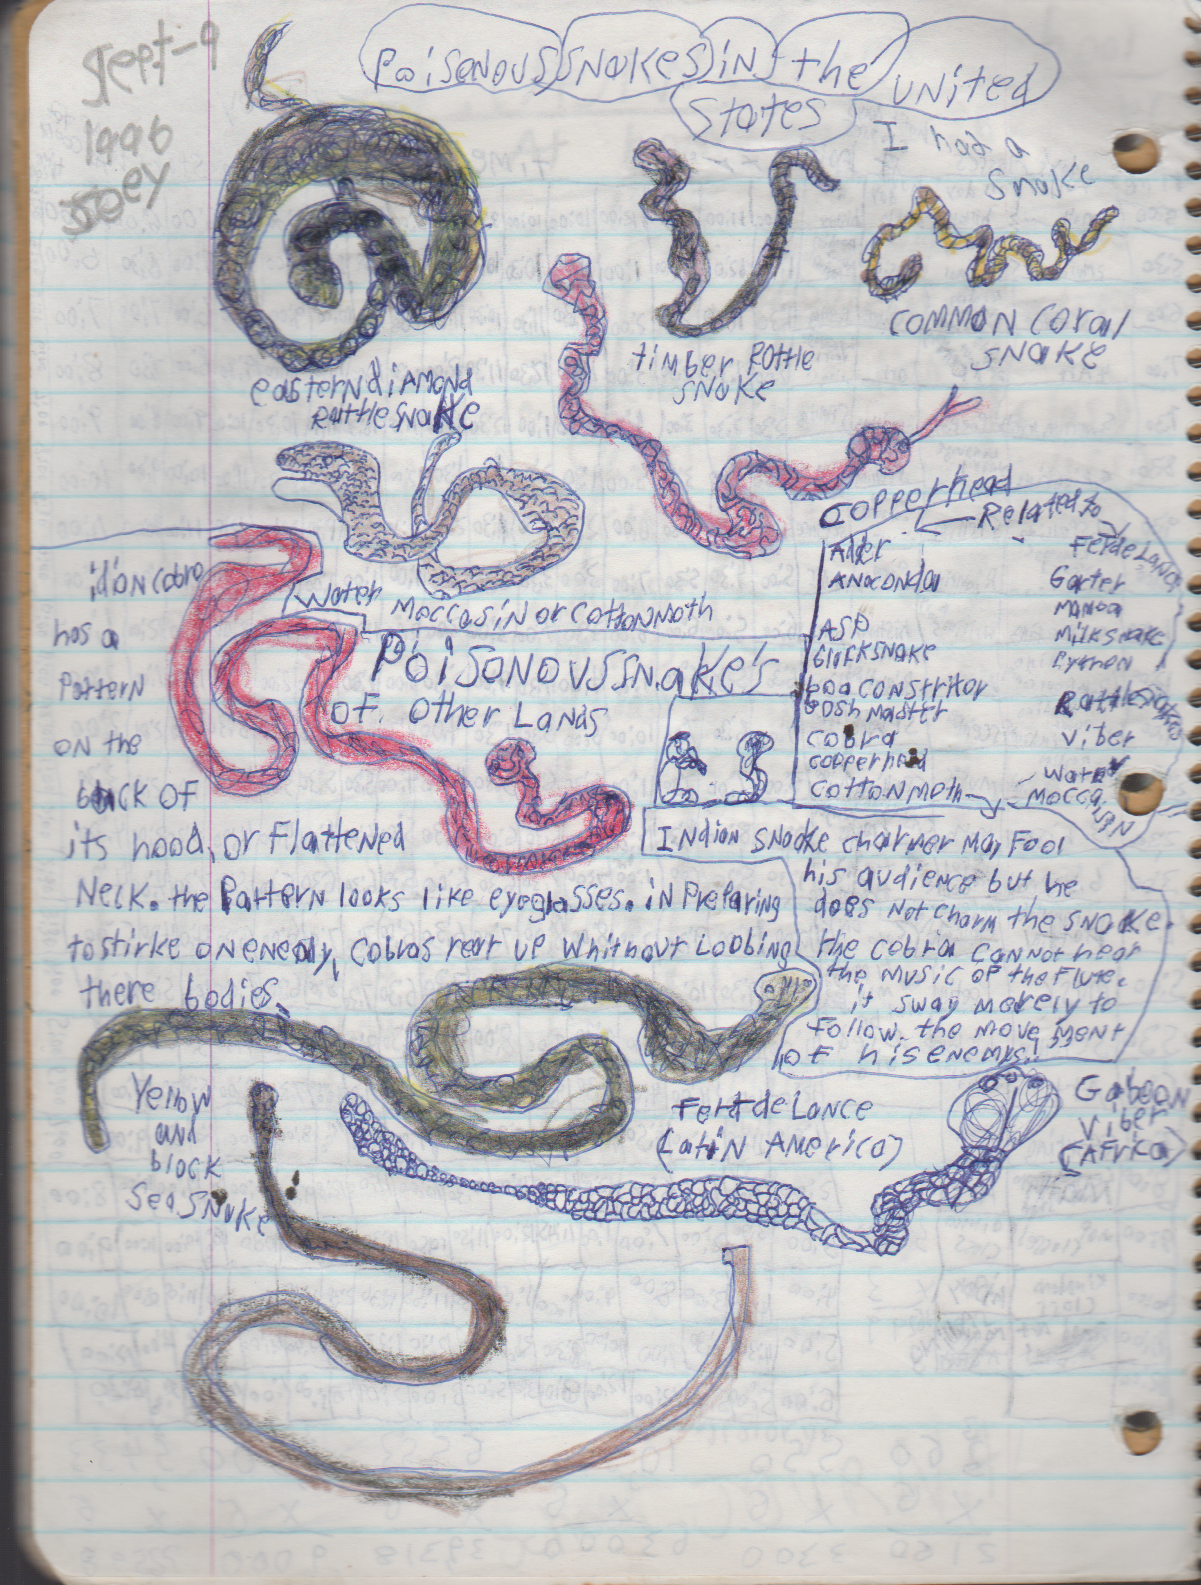 1996-08-18 - Saturday - 11 yr old Joey Arnold's School Book, dates through to 1998 apx, mostly 96, Writings, Drawings, Etc-004.png